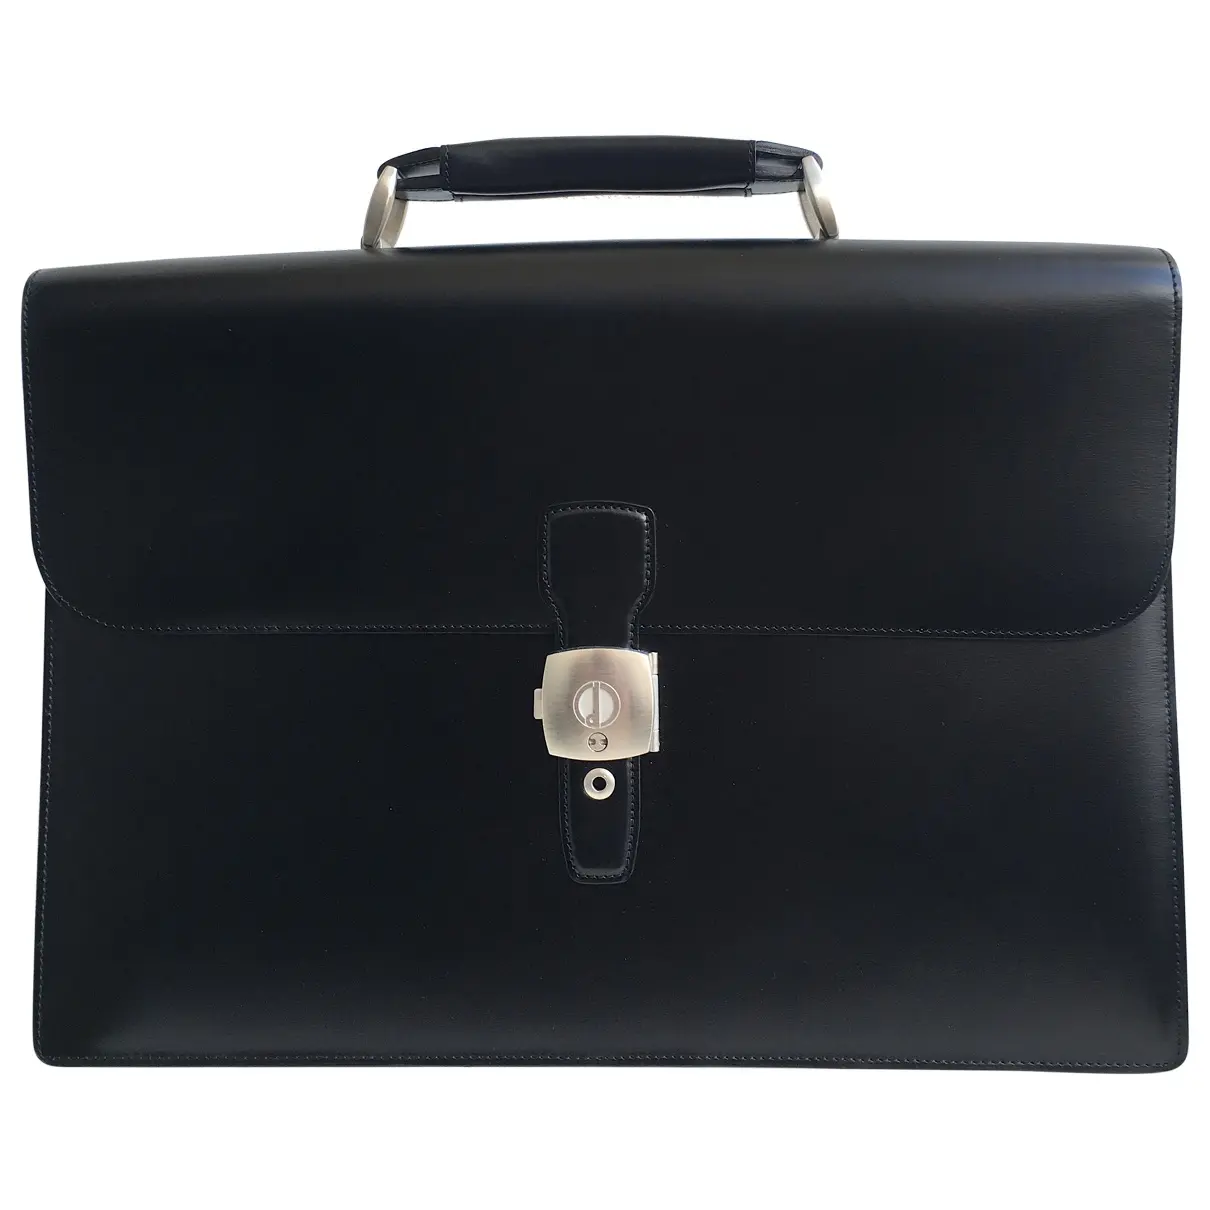 LEATHER SATCHEL Alfred Dunhill